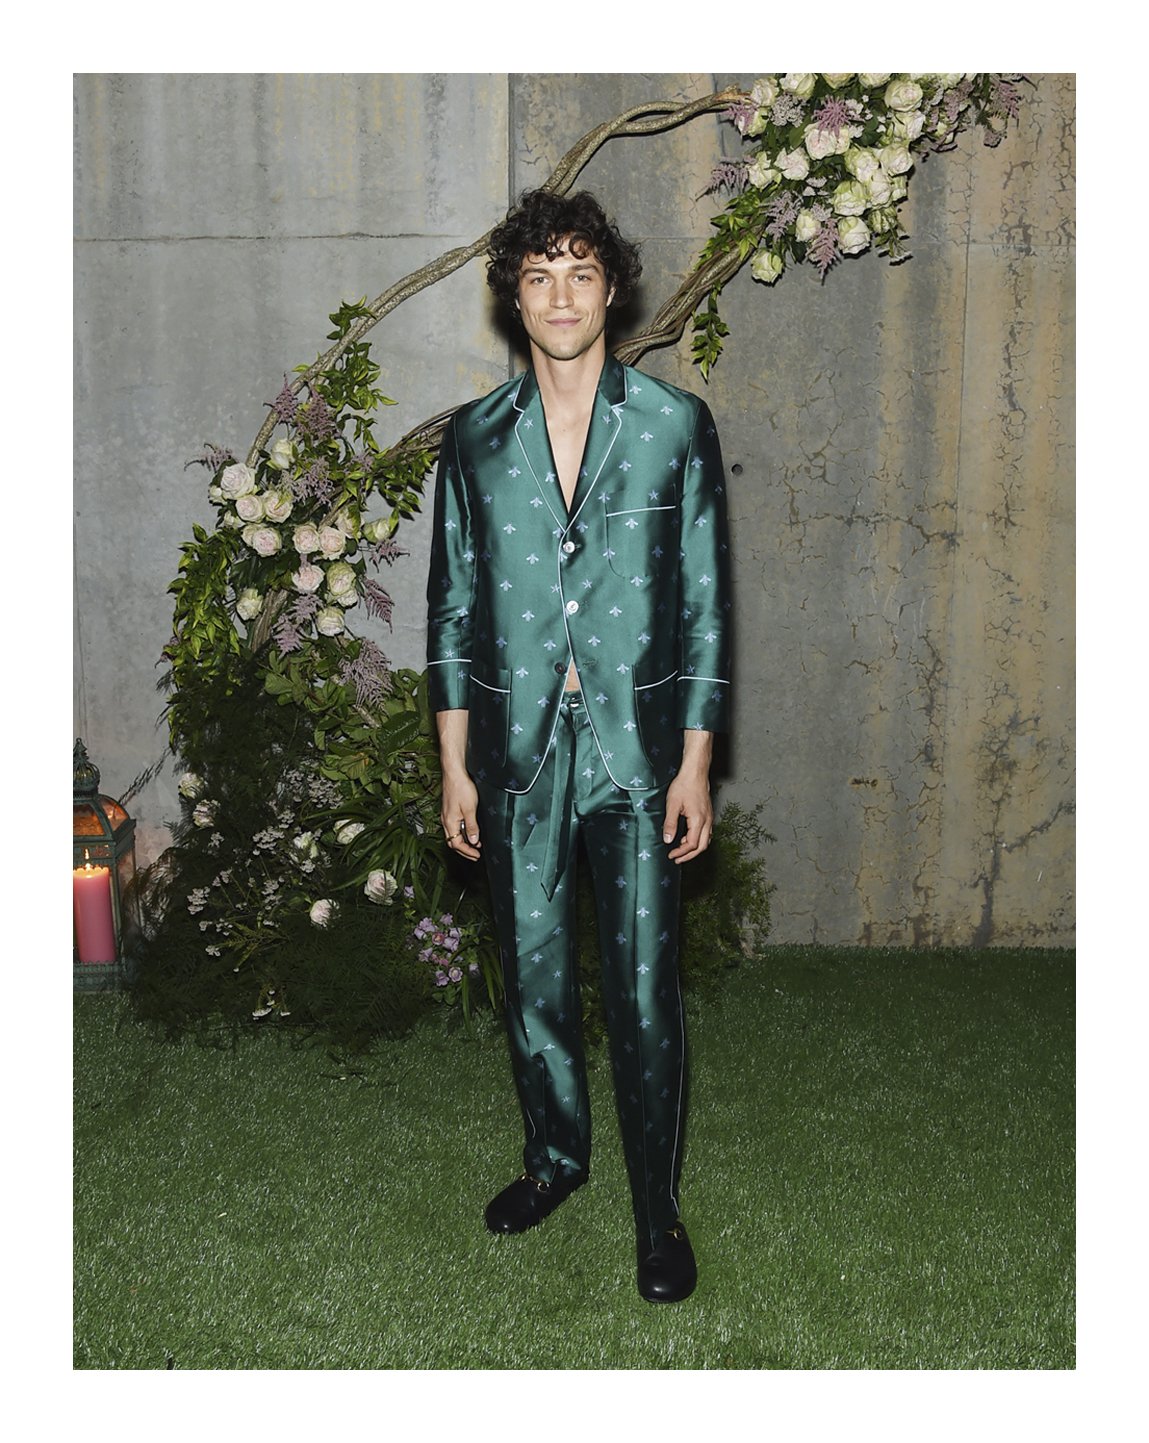 gucci on X: At the #Gucci Bloom party, #MilesMcMillan wore pajama style # Gucci pants and shirt. More  #InBloom   / X